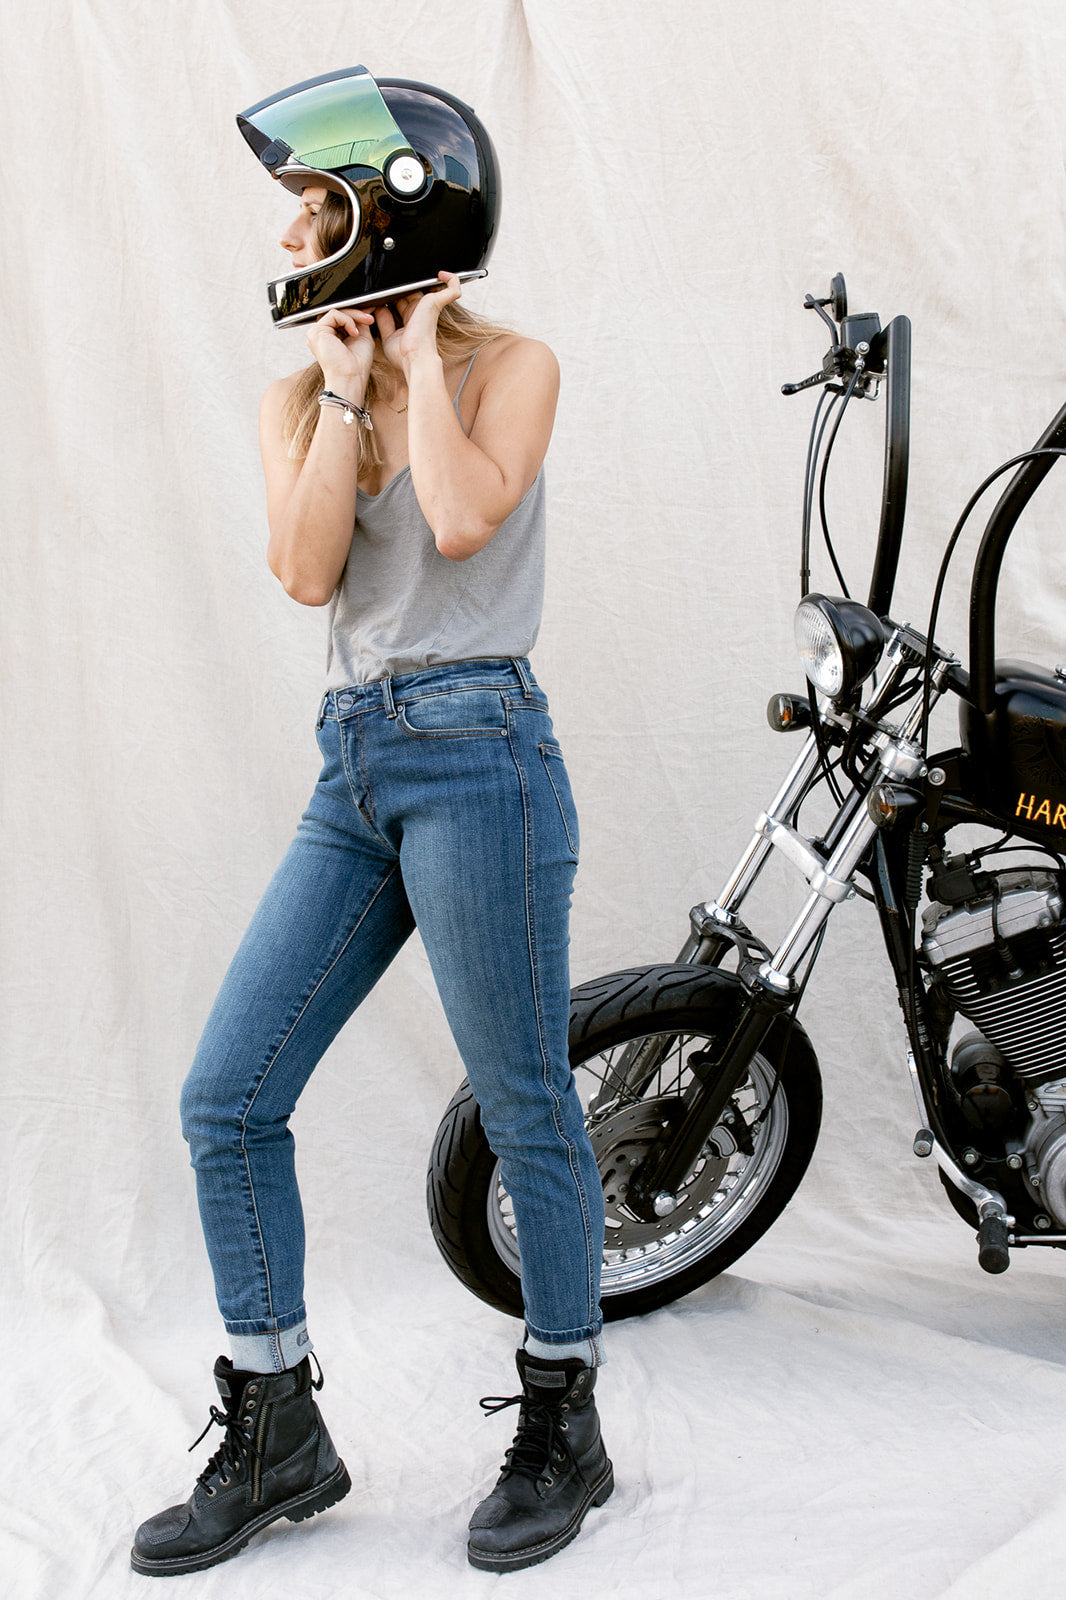 Women's motorcycle jeans  Find your perfect durable motorcycle